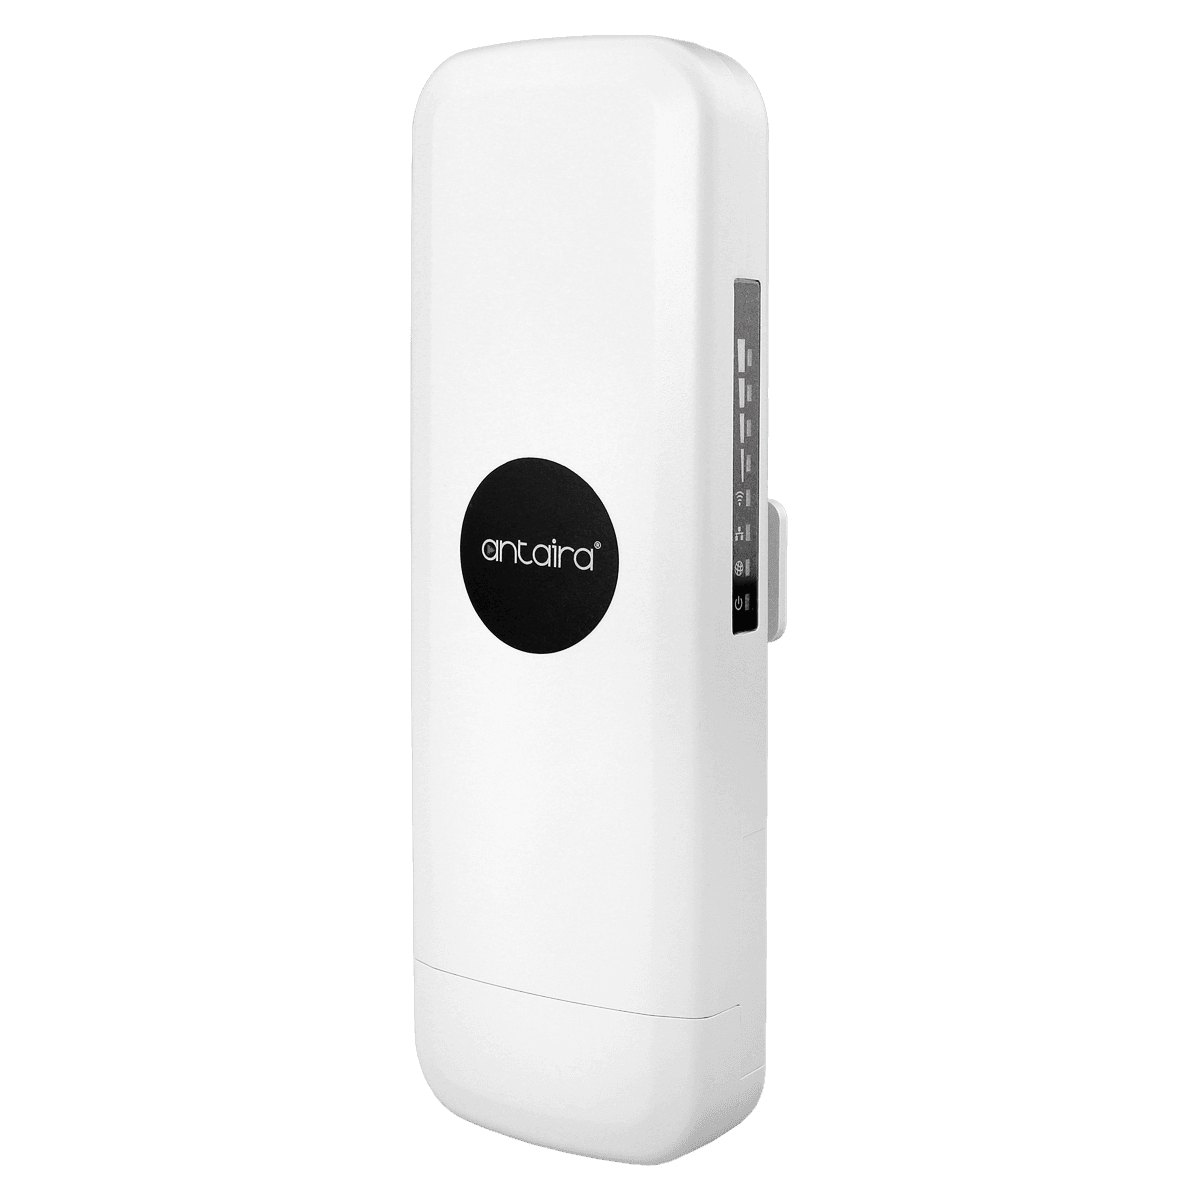 Antaira AMY-5133-AC-PD Industrial 802.11AC Wireless (Wi-Fi) LAN Bridge.Antaira Technologies’ AMY-5133-AC-PD is a simple point to point or point to multipoint IEEE 802.11 radio with a gigabit PoE wired interface. The gigabit Ethernet IEEE 802.3af/at interface provides a means to